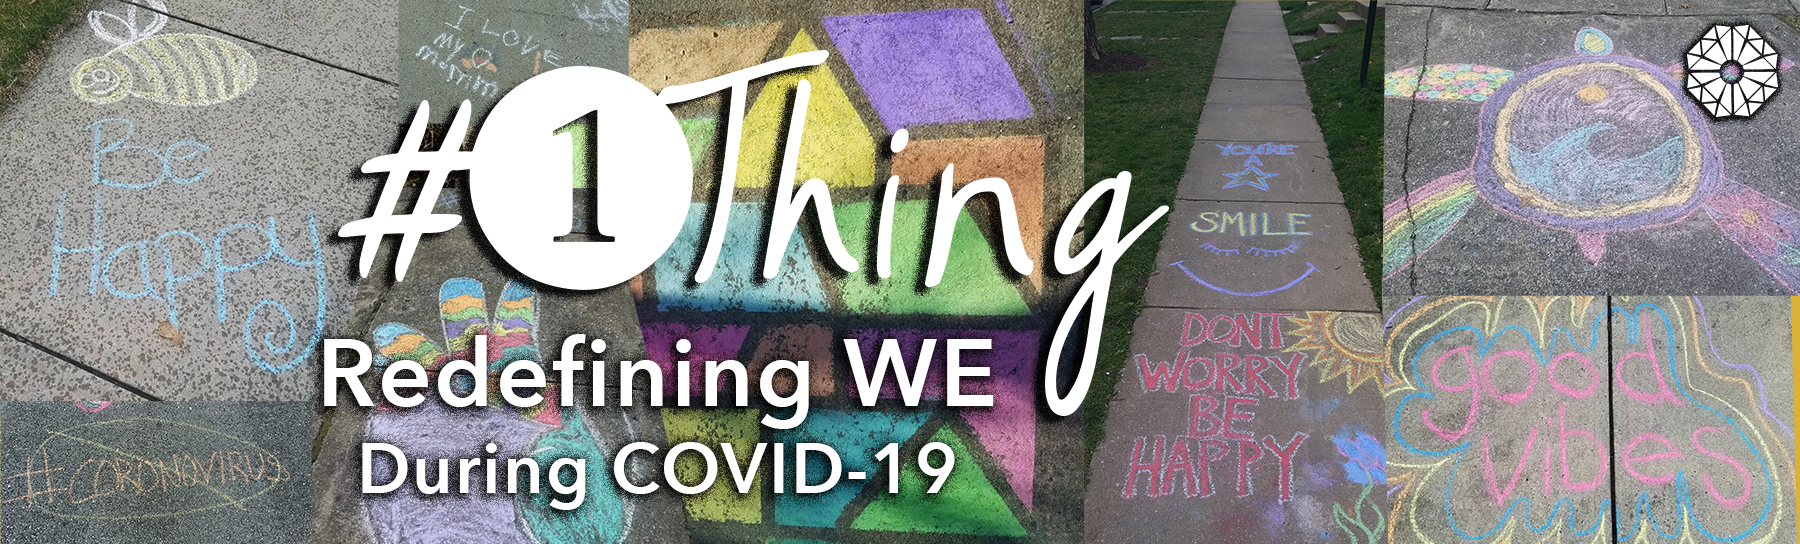 Redefining WE during COVID-...19